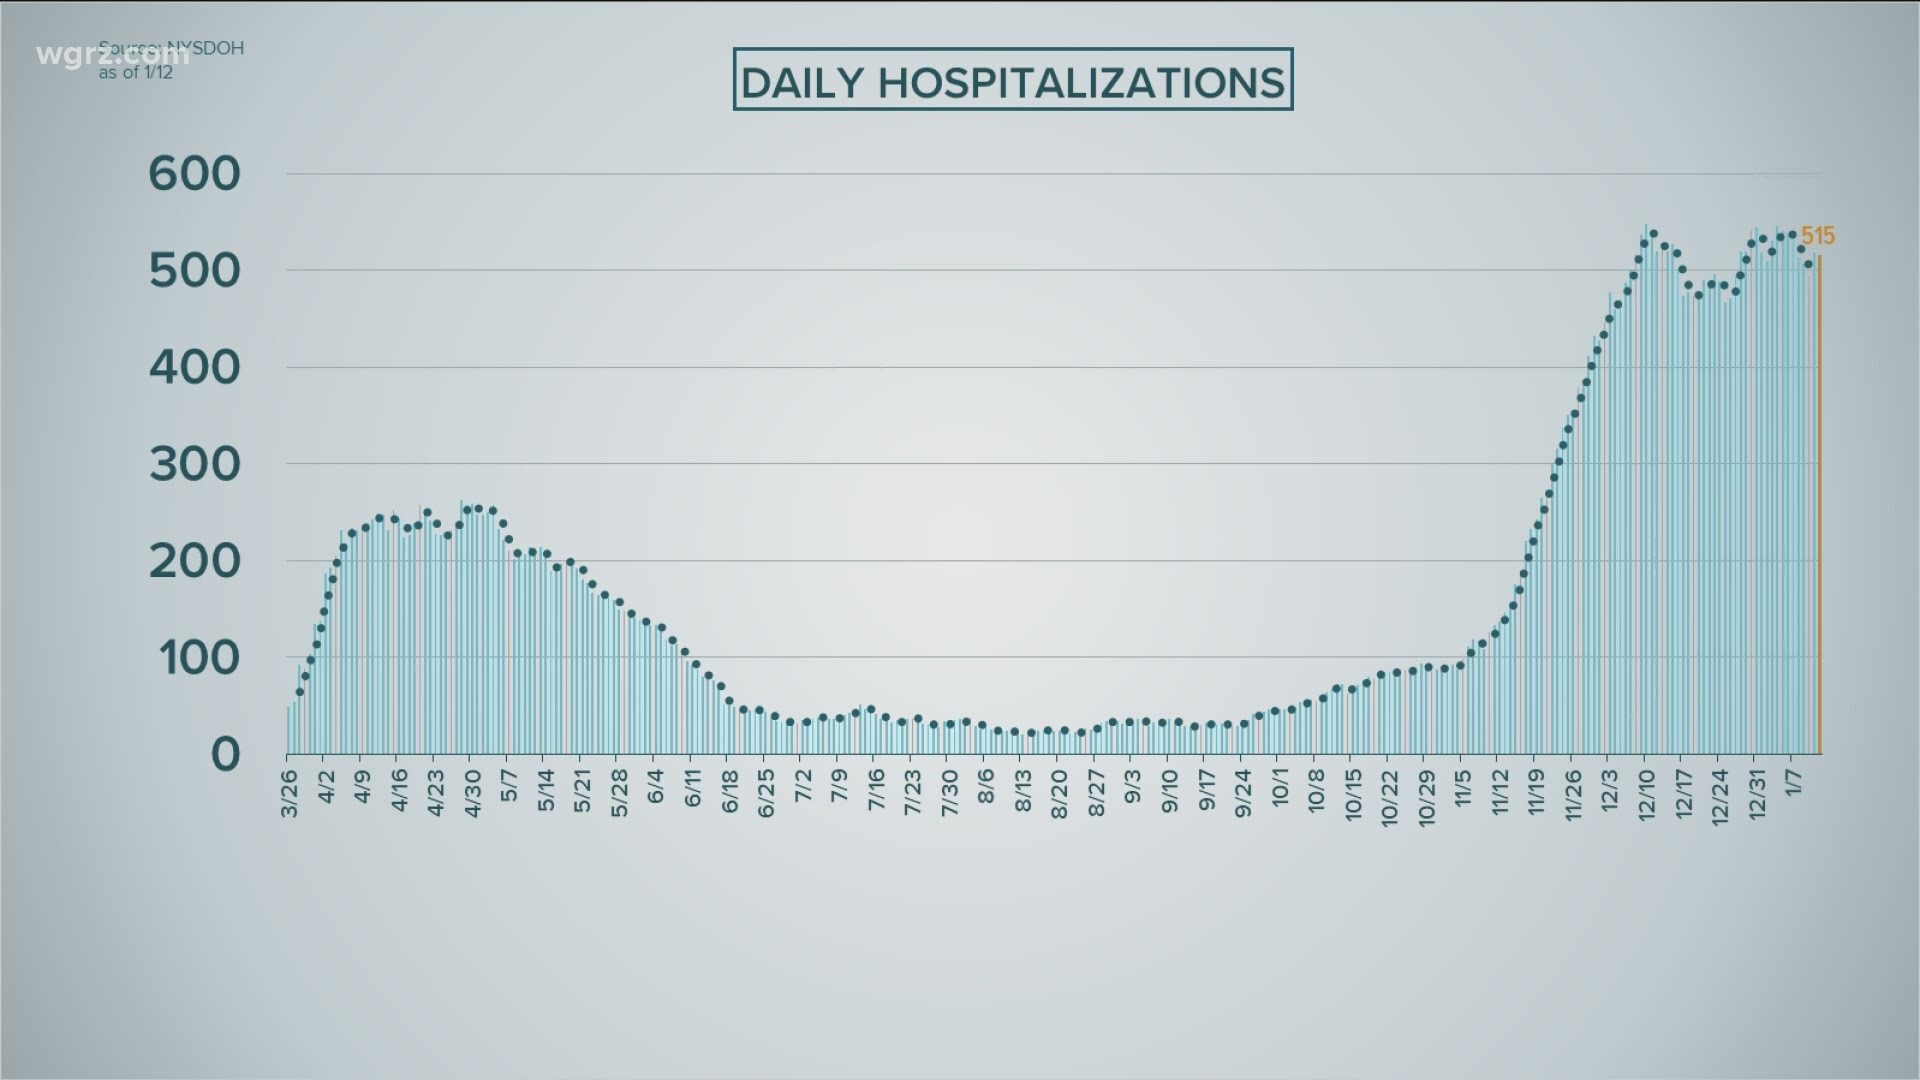 The latest data released from New York State on Wednesday shows a decrease in the COVID-19 hospitalizations here in Western New York.